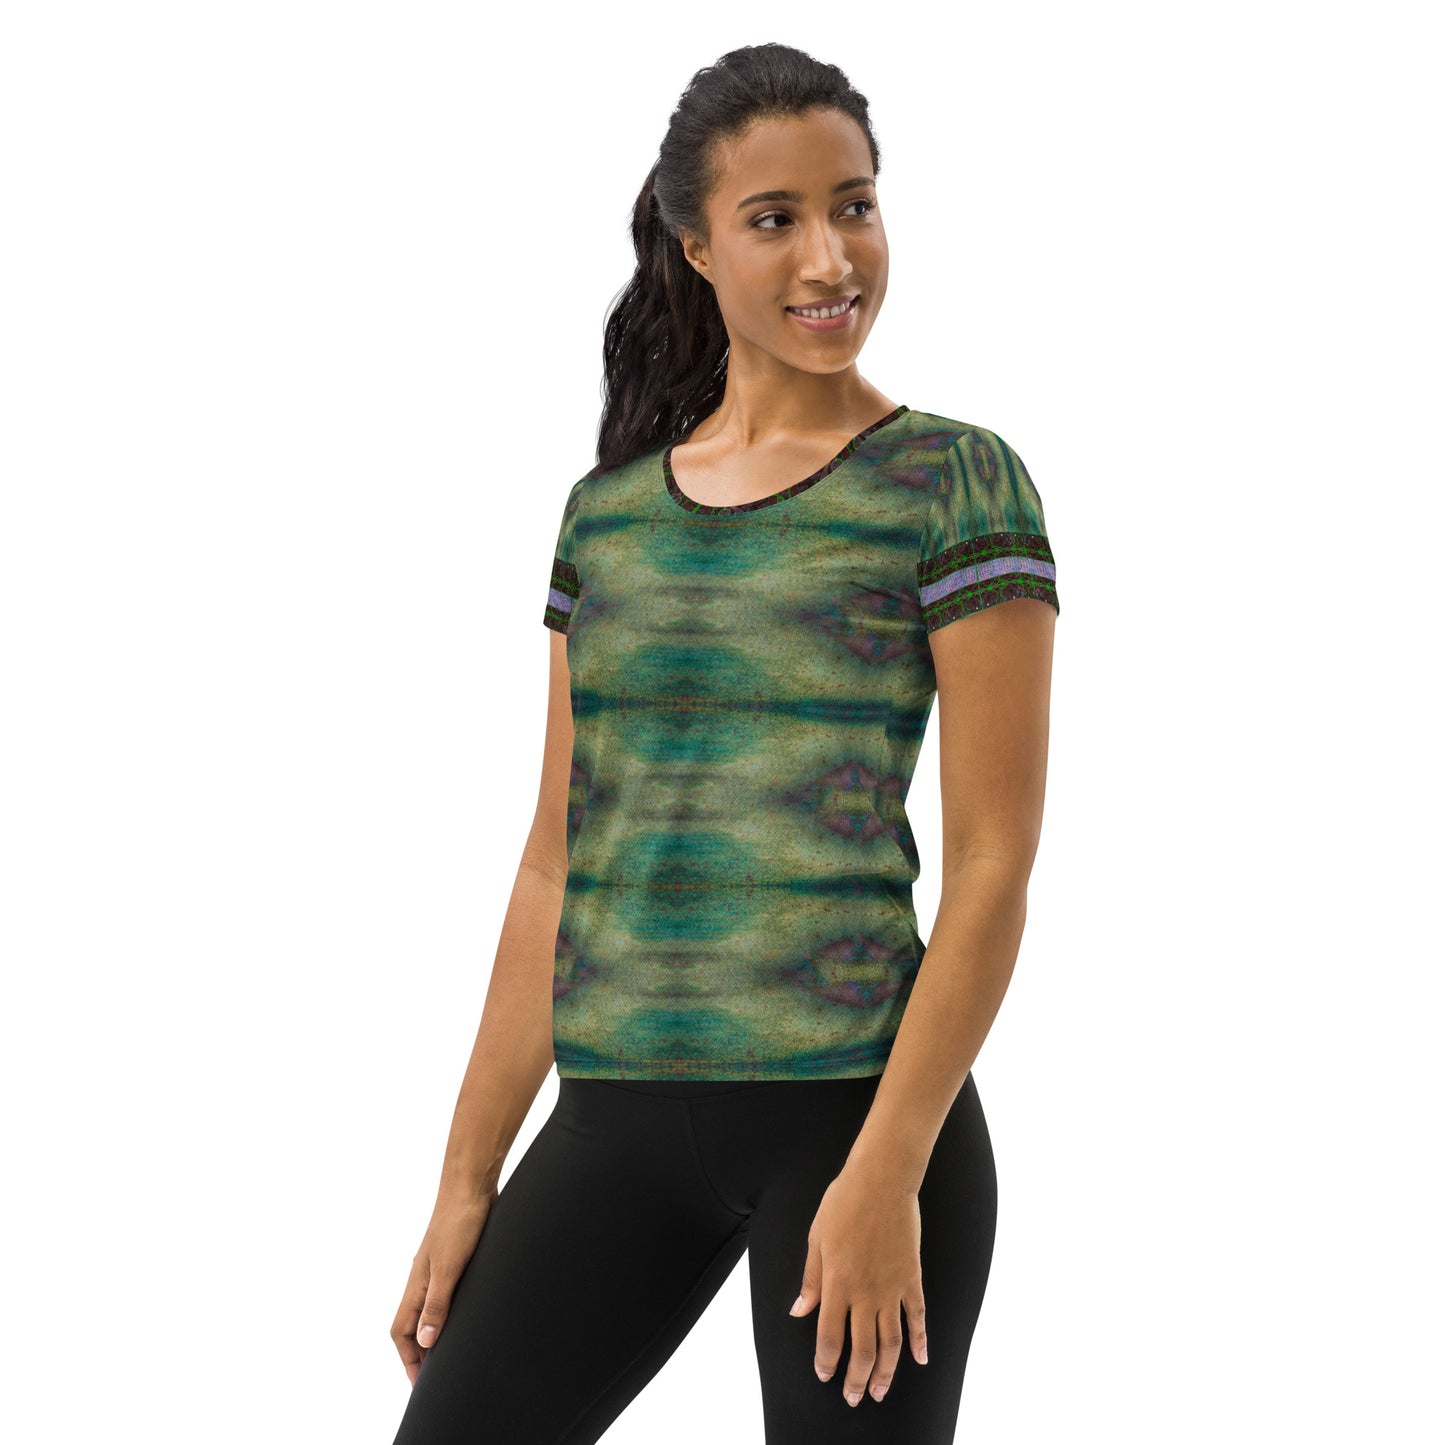 Athletic T-Shirt (Her/They)(Tree Link Stripe) RJSTH@Fabric#4 RJSTHS2021 RJS